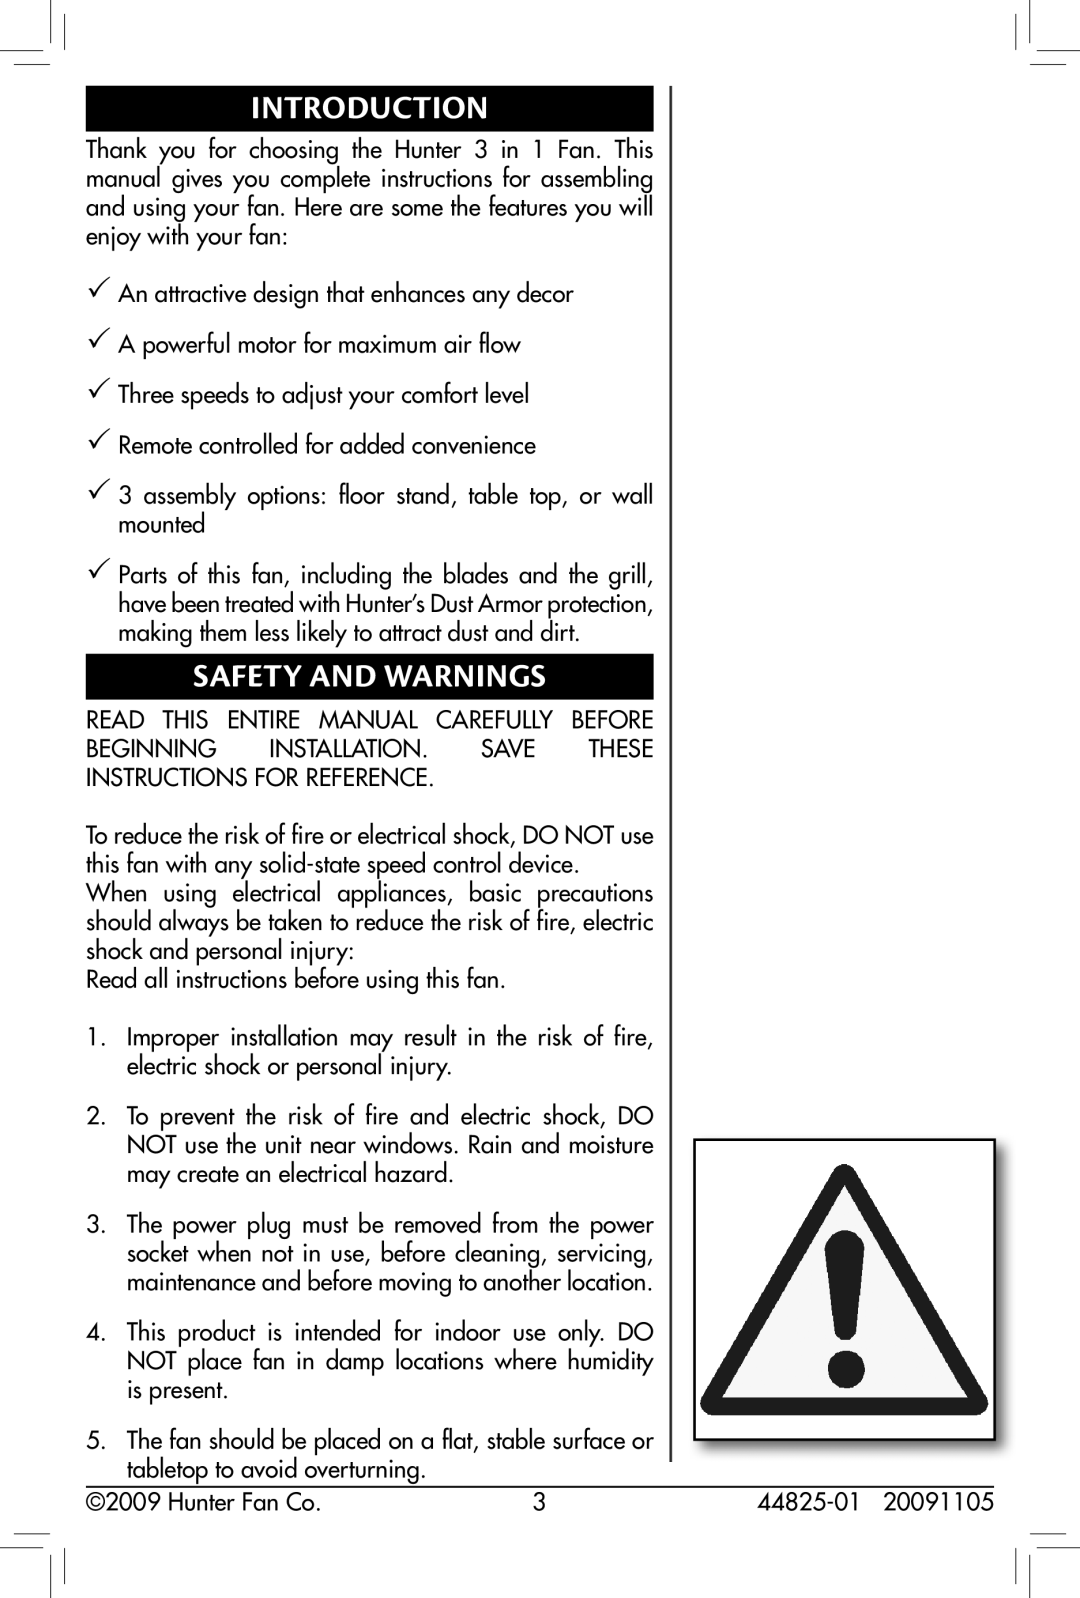 Hunter Fan 44825-01, 90390, 20091105 owner manual Introduction, Safety and Warnings 